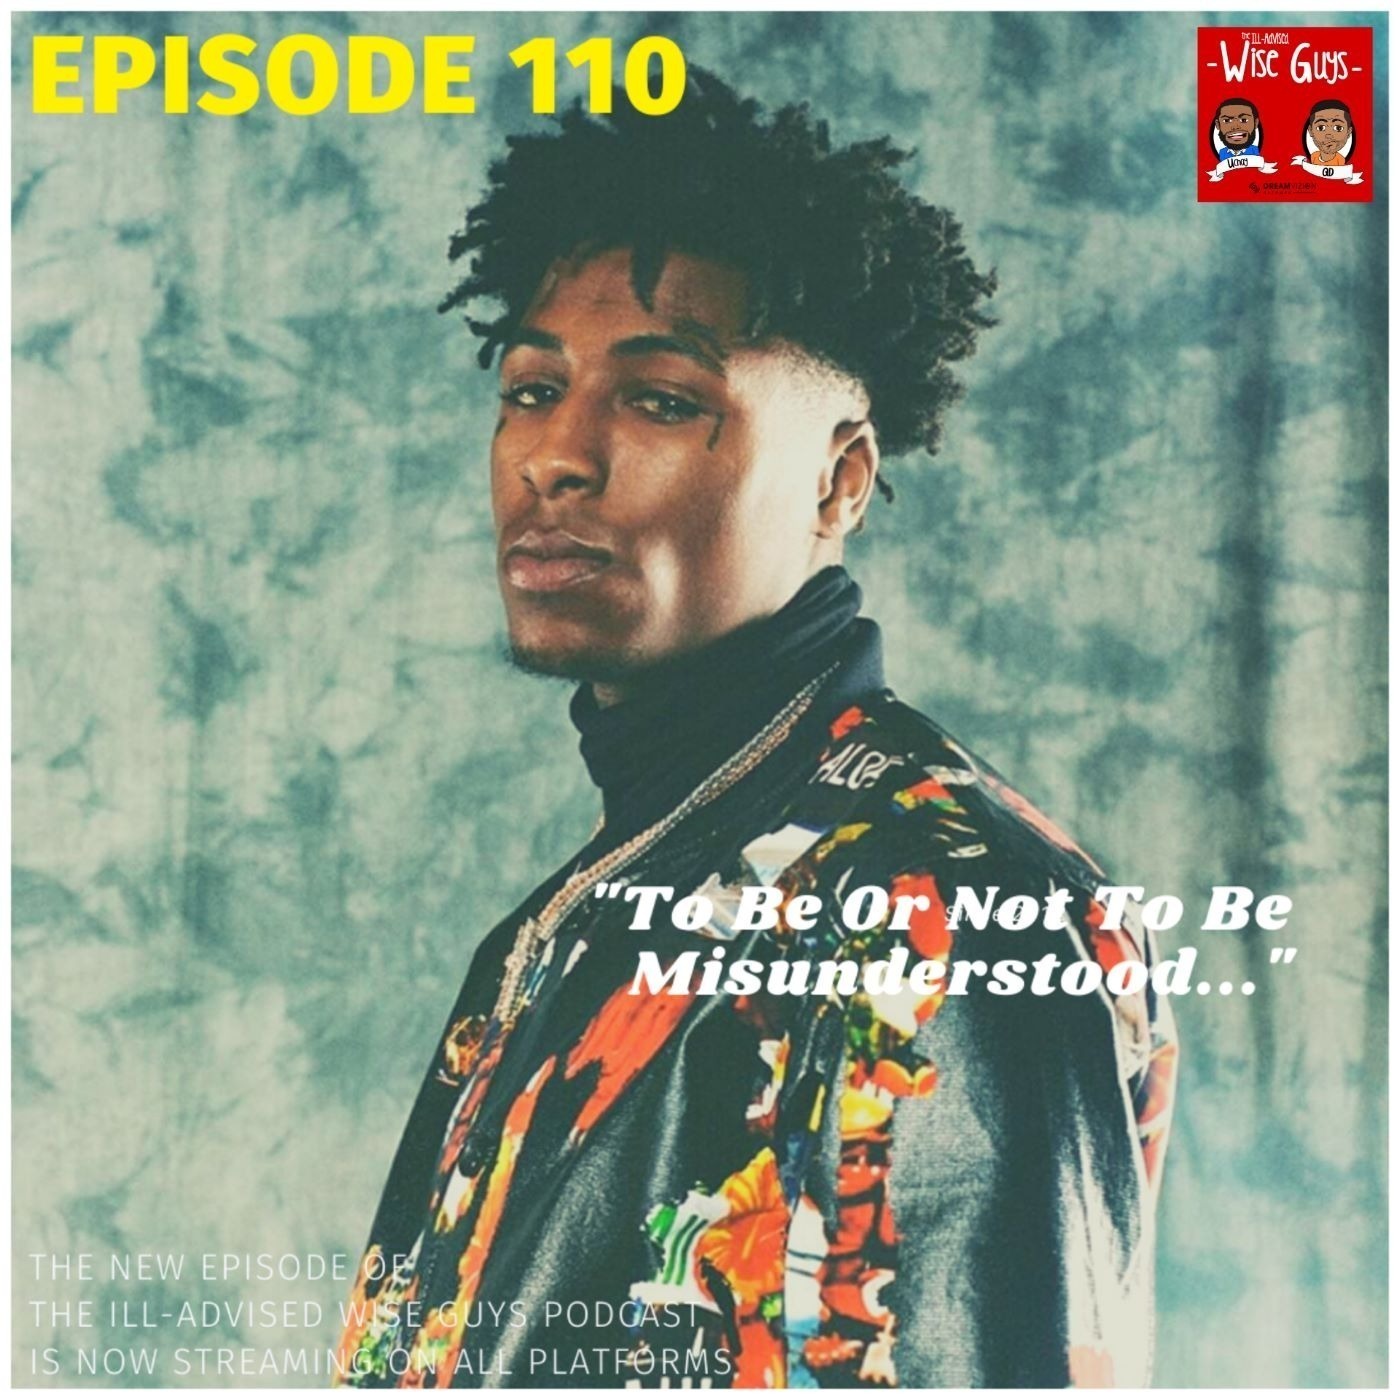 Episode 110 - "To Be Or Not To Be Misunderstood..." (Feat. Jordan Lo) Image